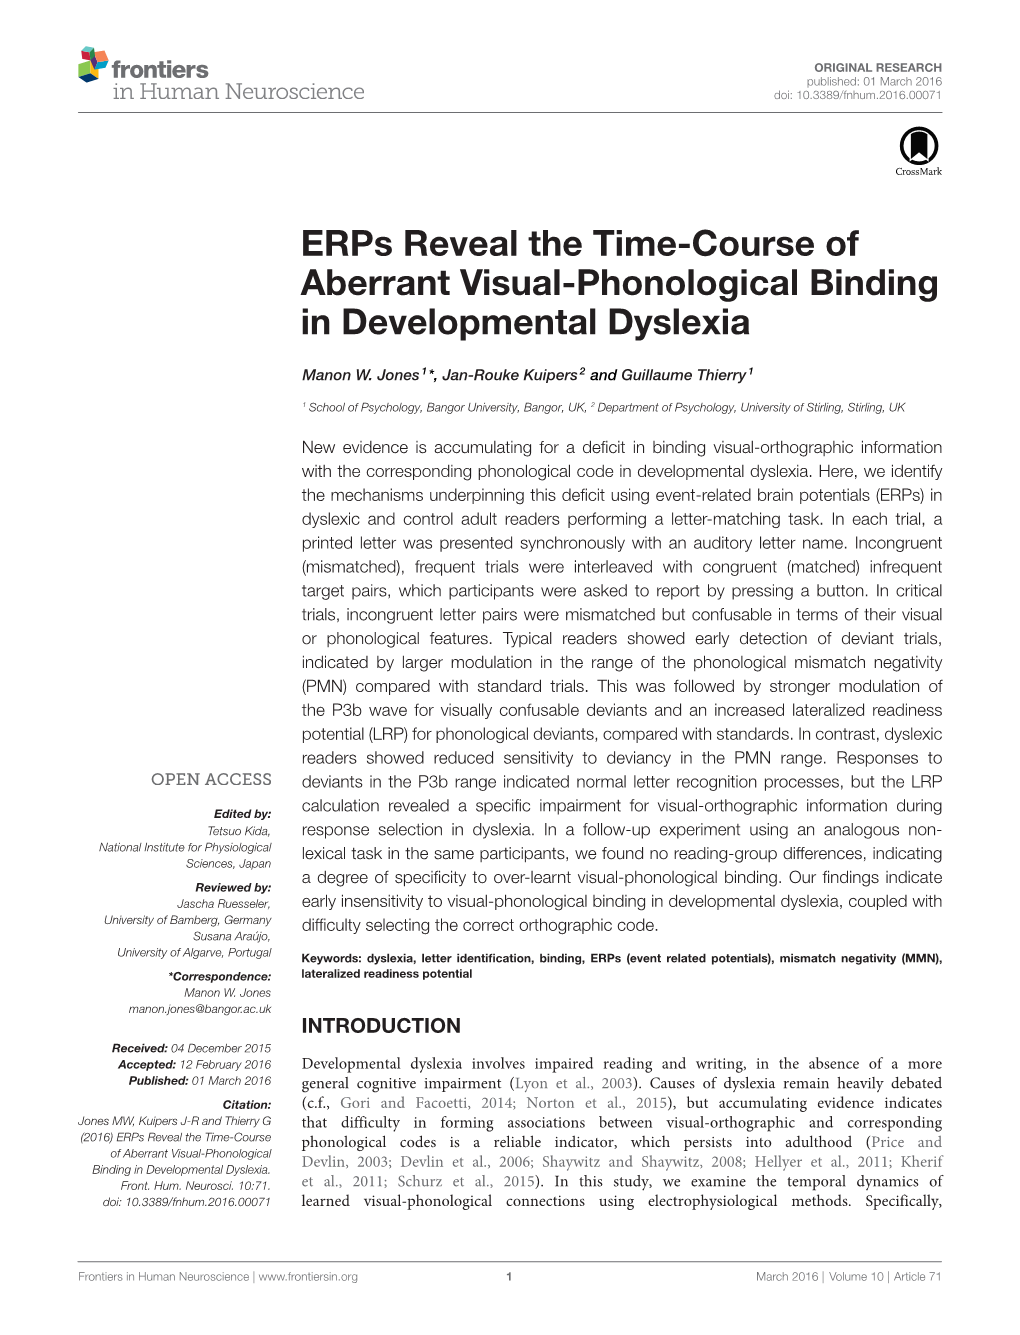 Erps Reveal the Time-Course of Aberrant Visual-Phonological Binding in Developmental Dyslexia